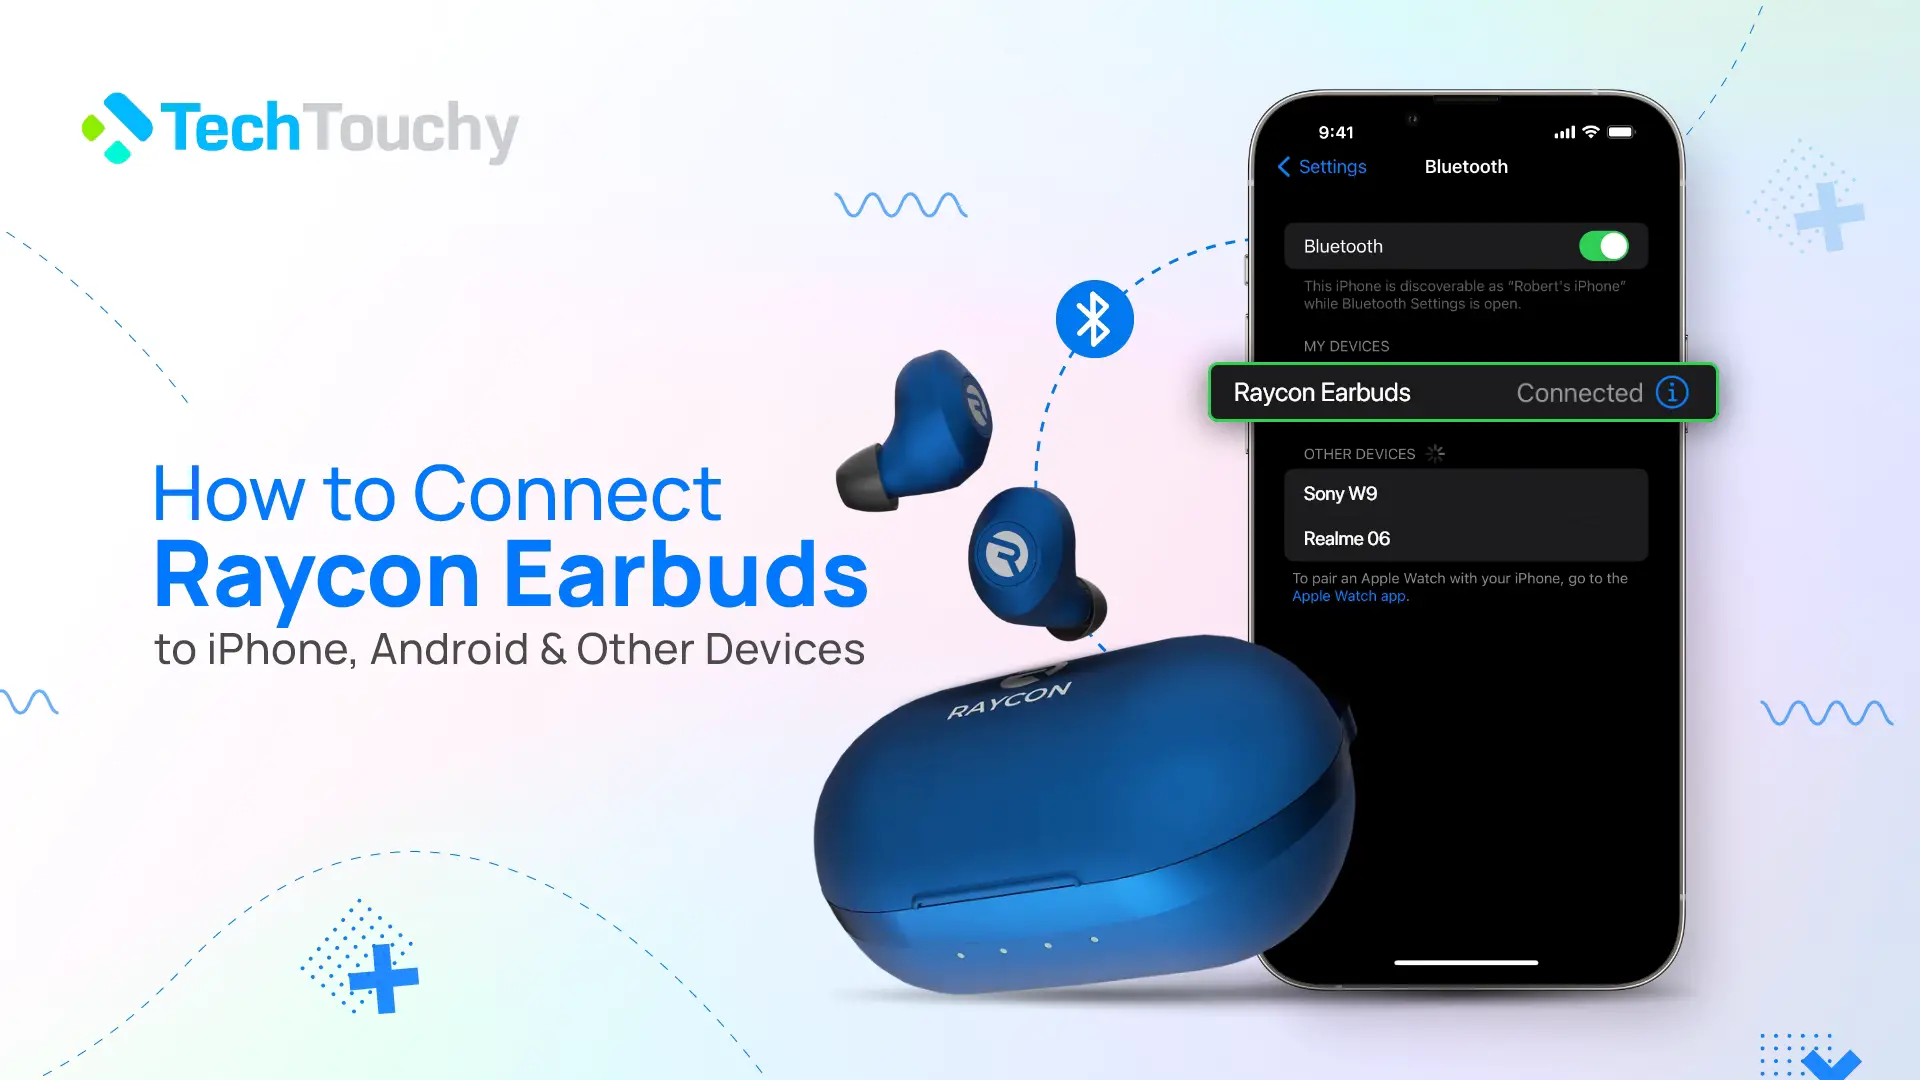 How to Connect Raycon Earbuds to iPhone, Android & Other Devices